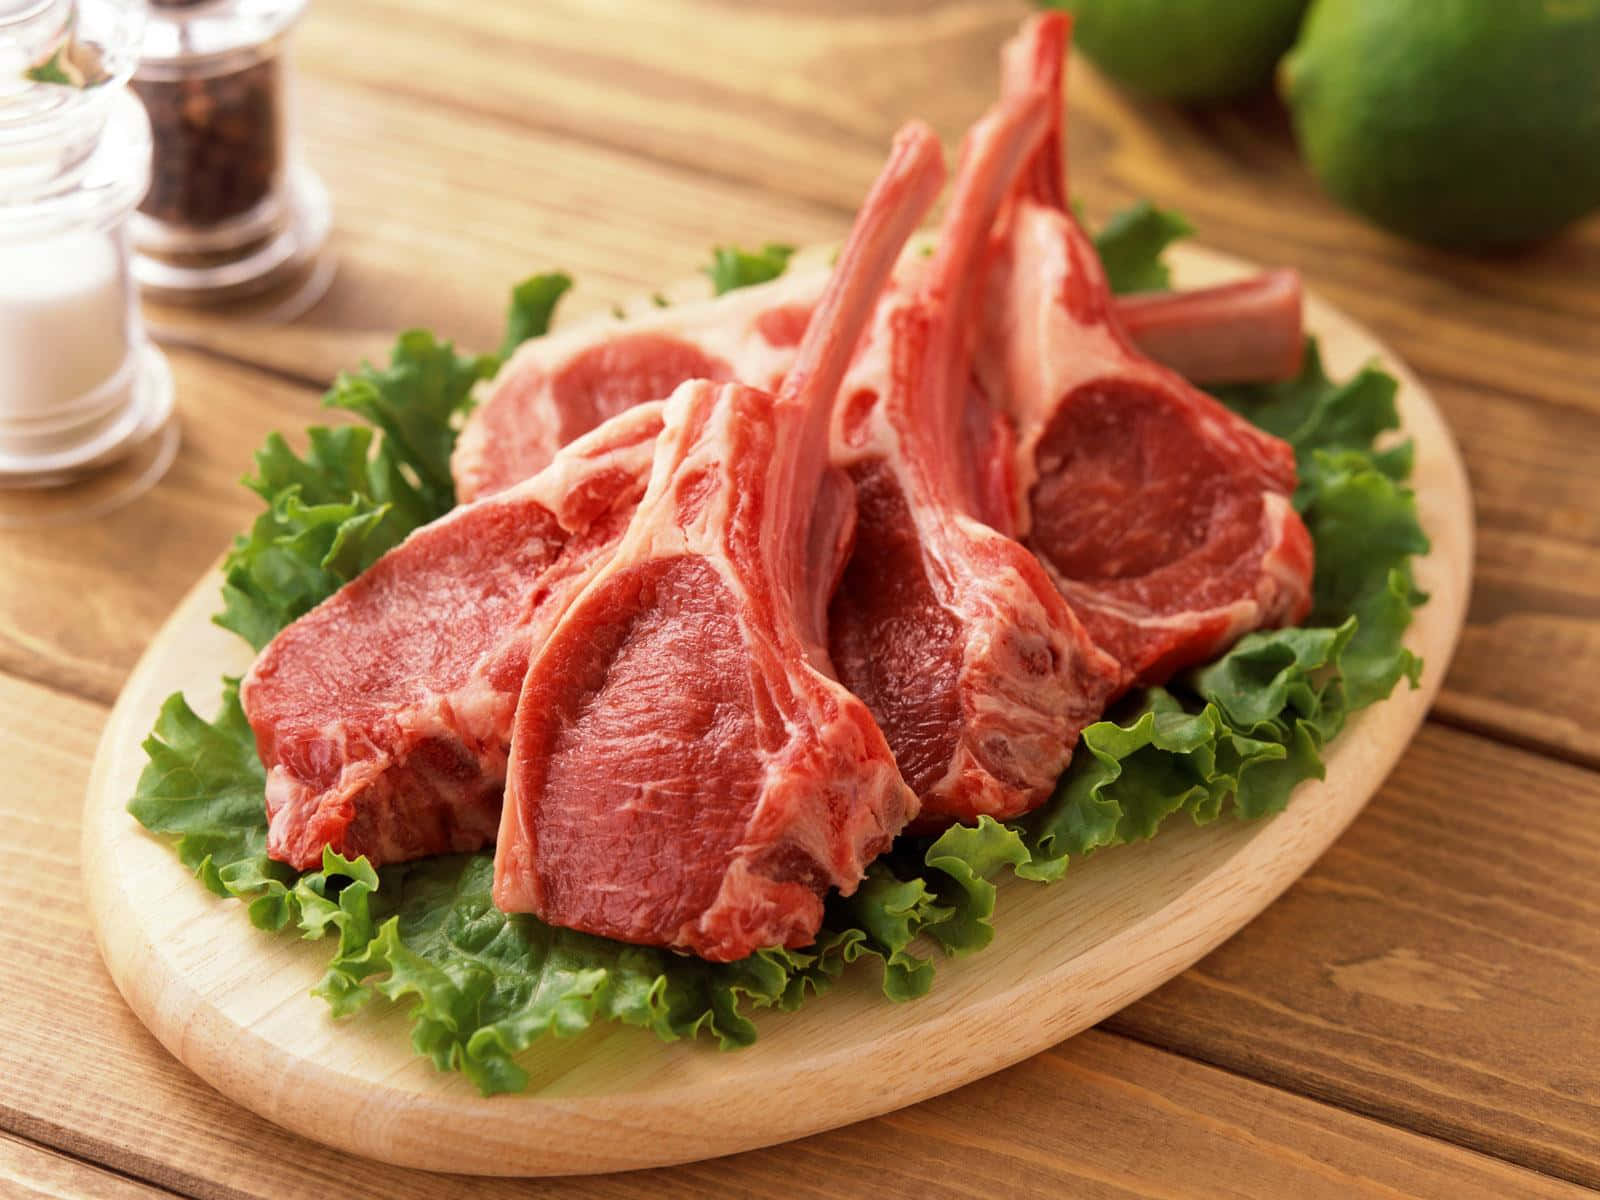 A Plate Of Lamb Chops On A Wooden Table